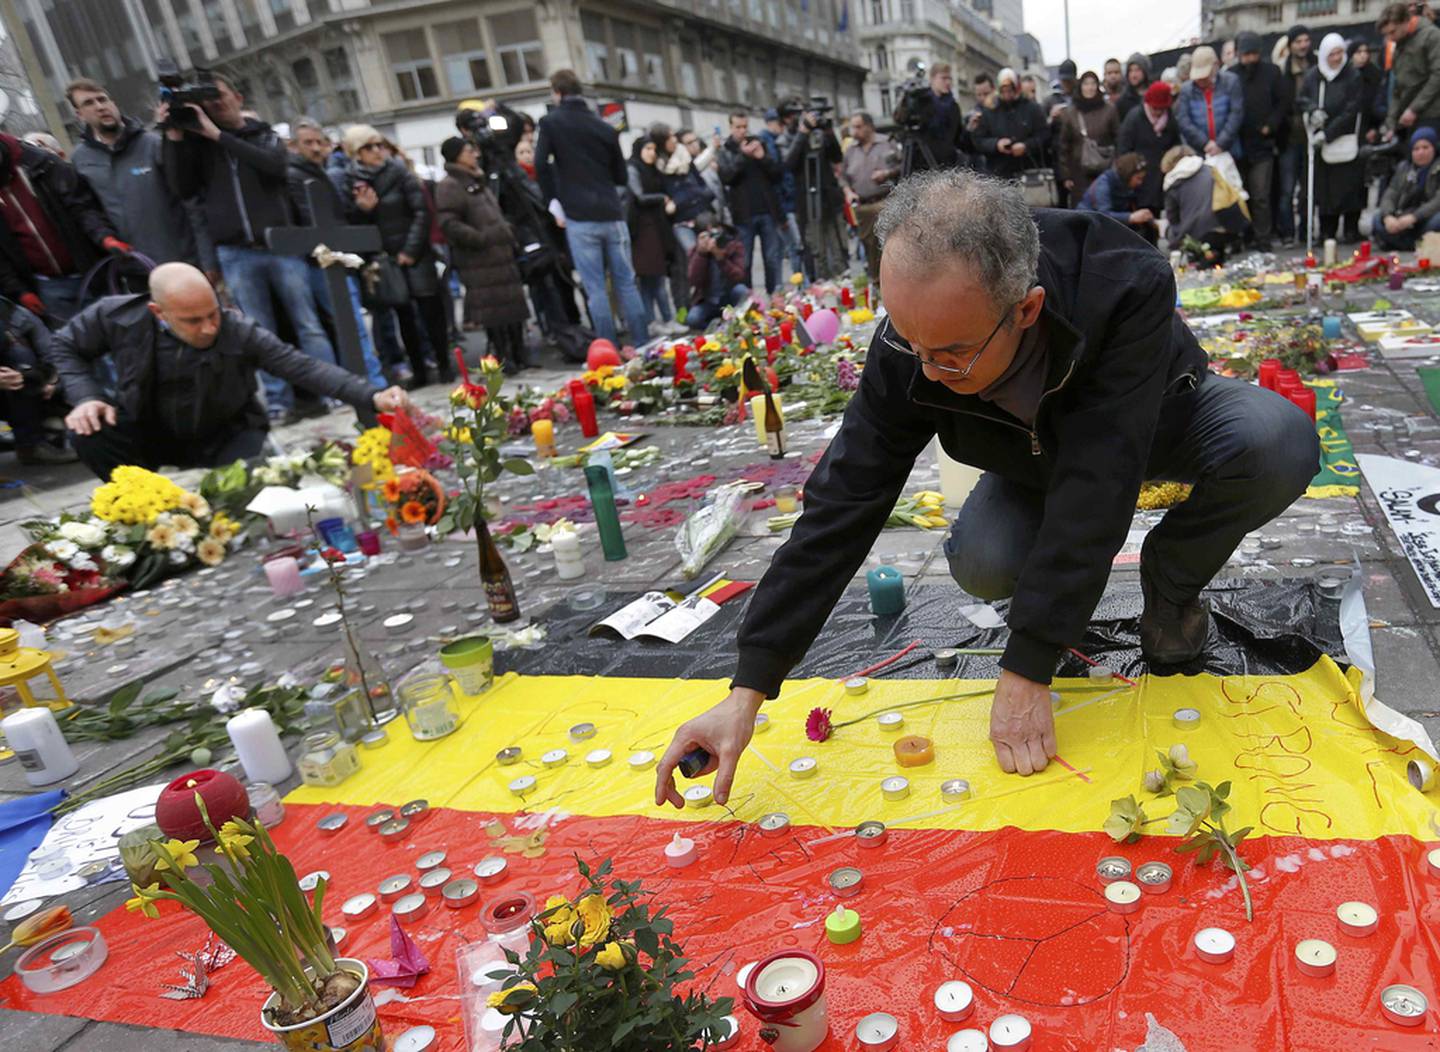 A street memorial in Brussels to the victims of the 2016 attacks. Reuters